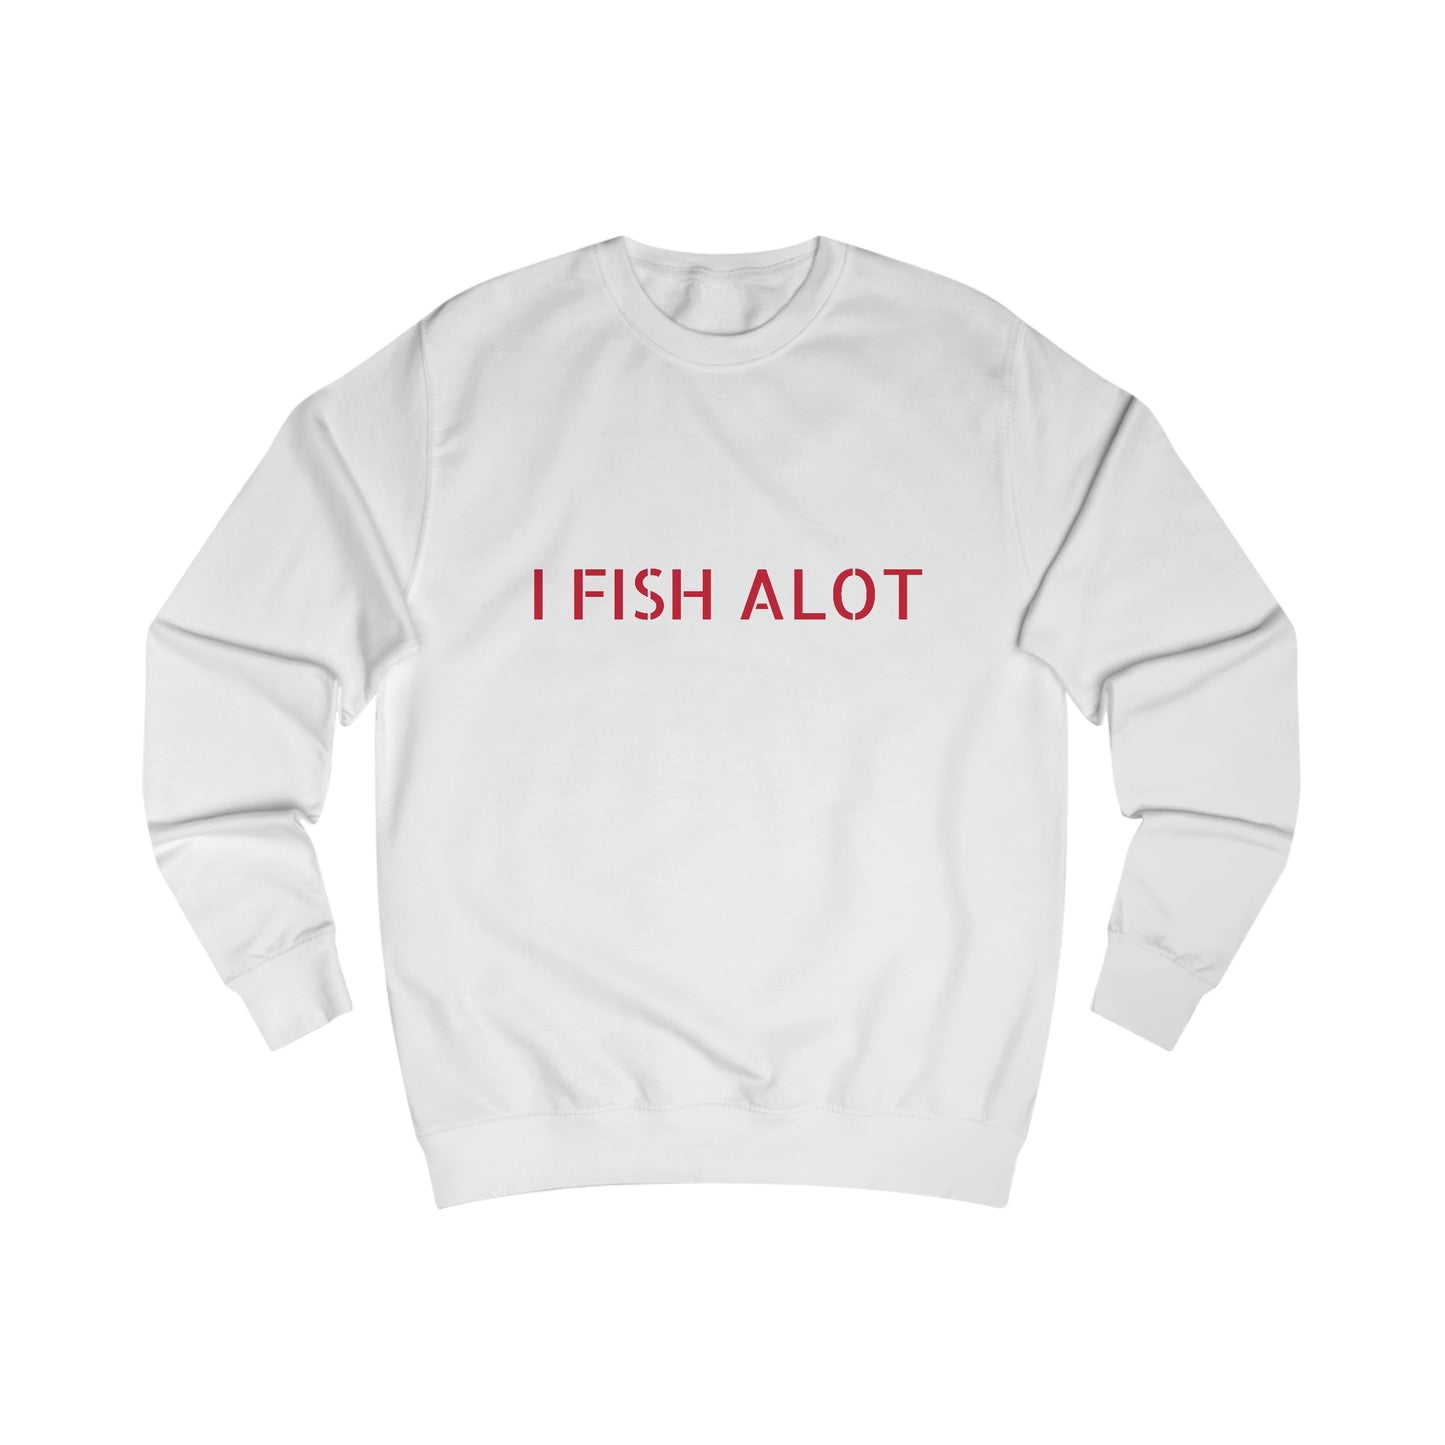 Men's Sweatshirt is customizable. Great gifts for him or her.